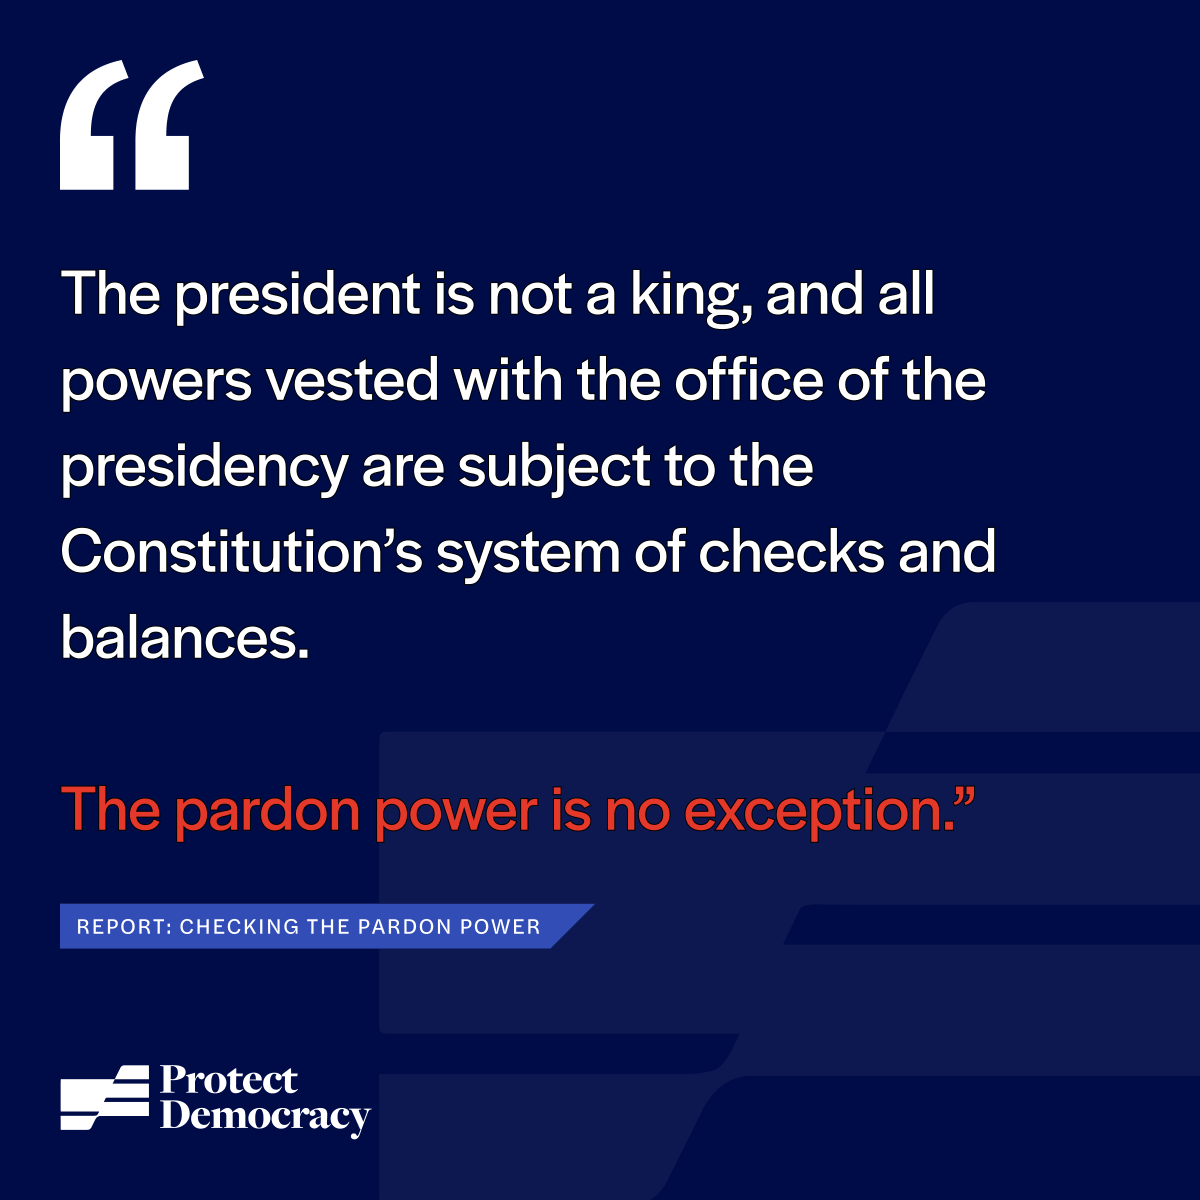 No one power can run roughshod over other parts of the Constitution. The pardon power is no exception.